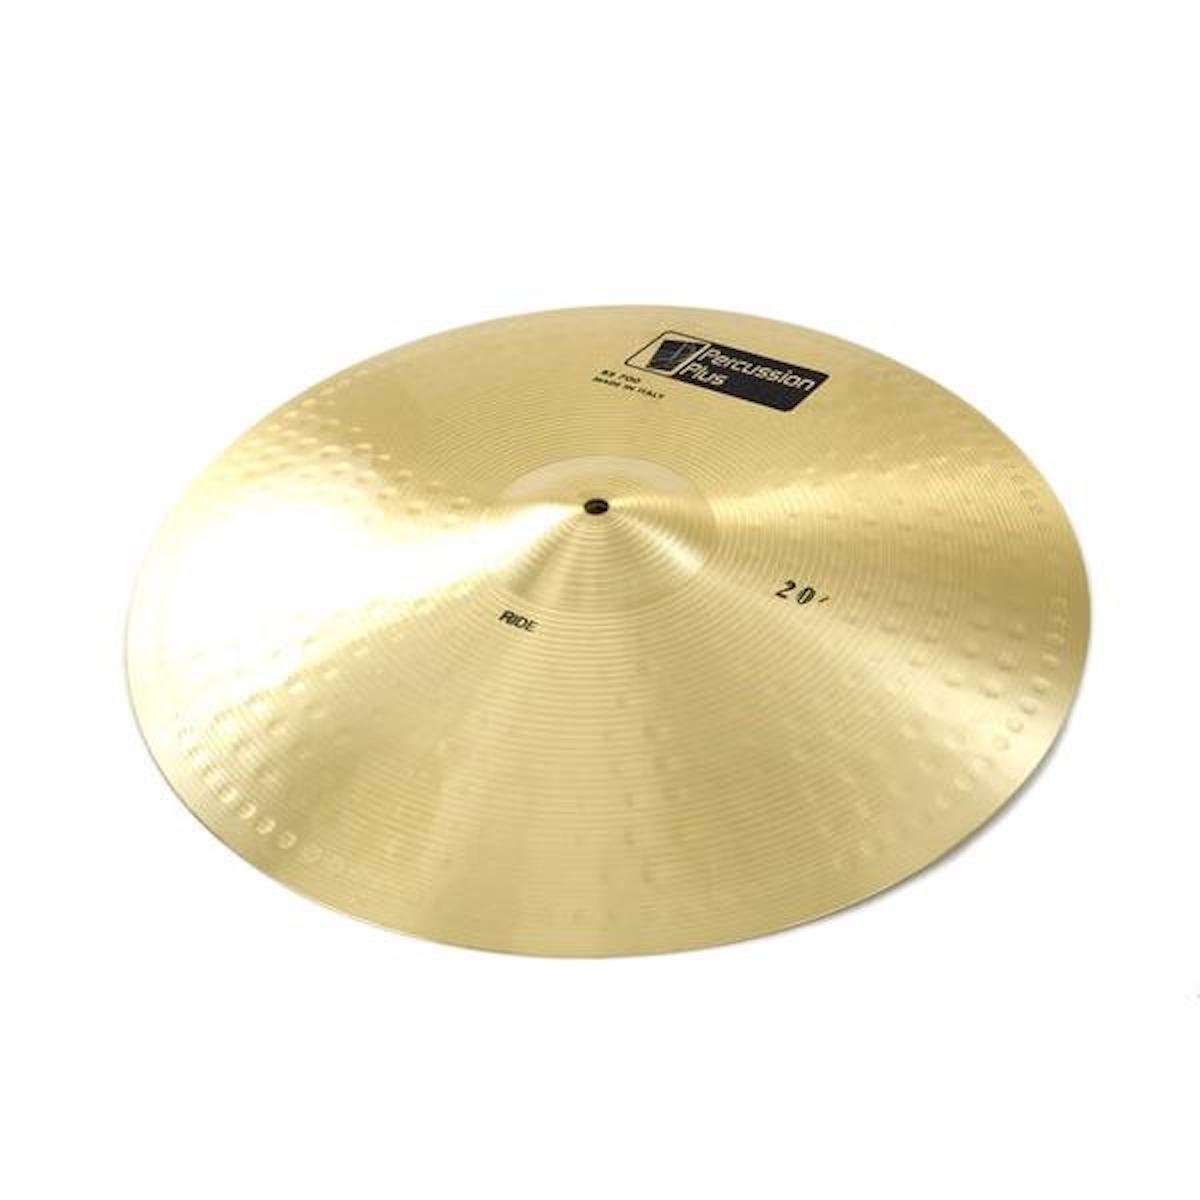 Percussion Plus 20" Ride Cymbal